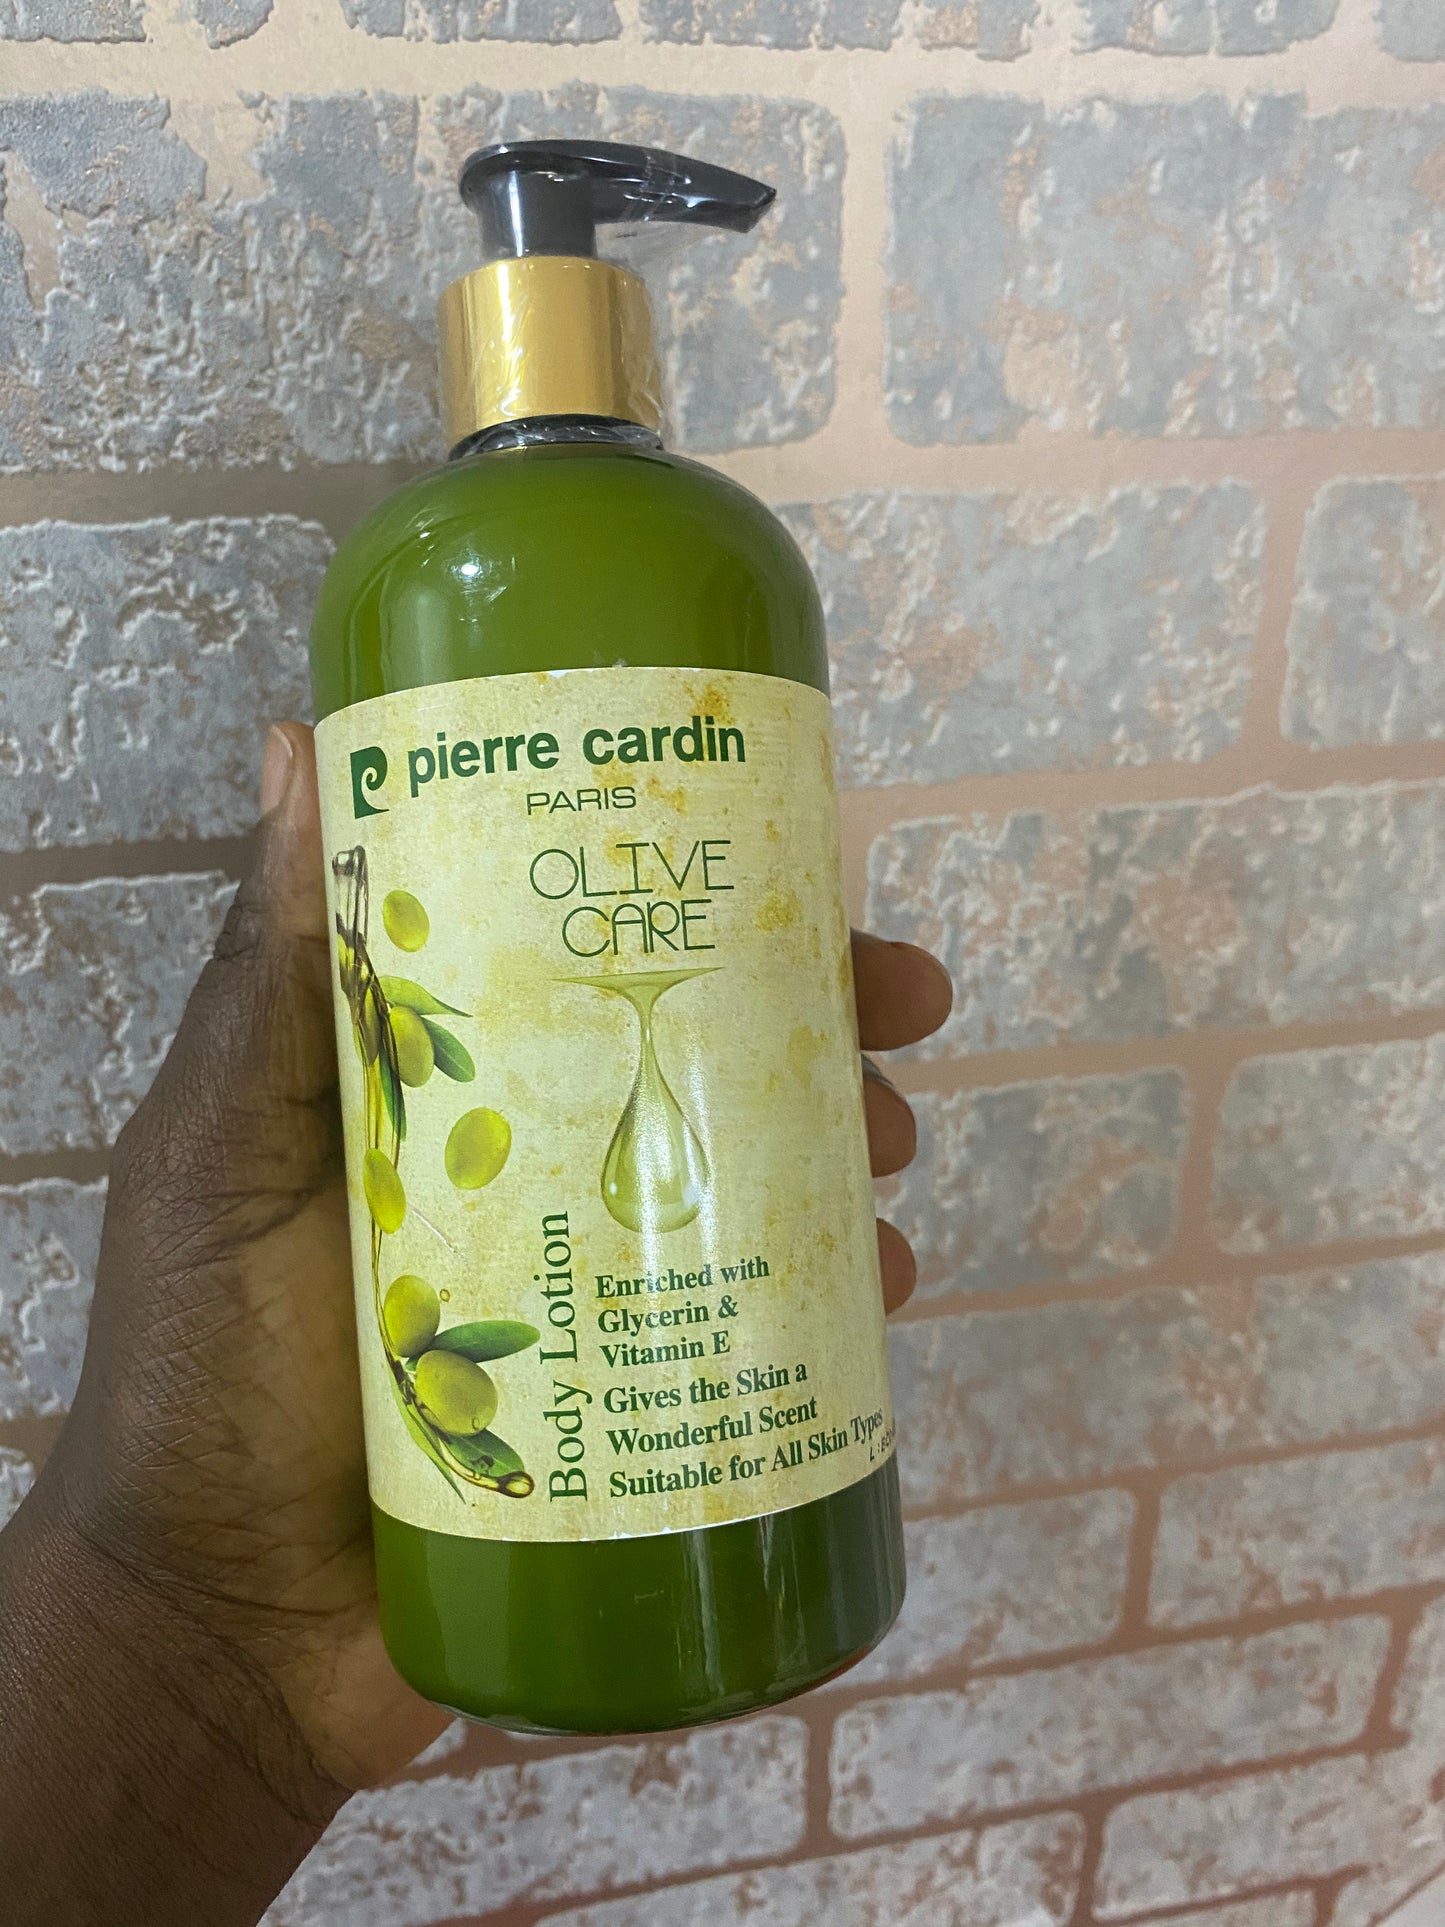 Pierre Cardin Olive Care Body Lotion